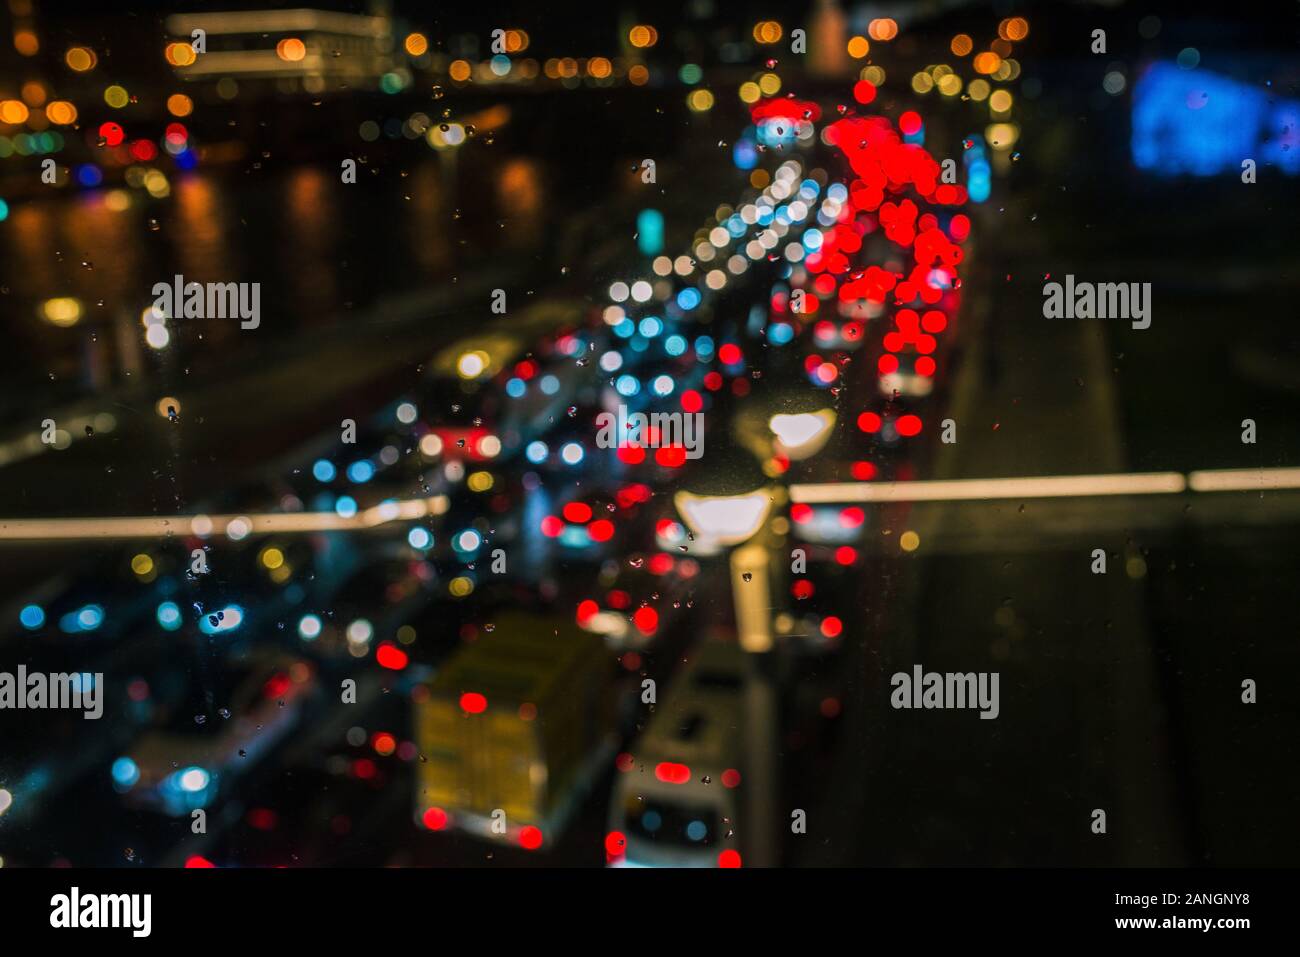 Night road with blurry cars and headlights. Car traffic shot through glass, focusing on raindrops. Rainy and cloudy day Stock Photo